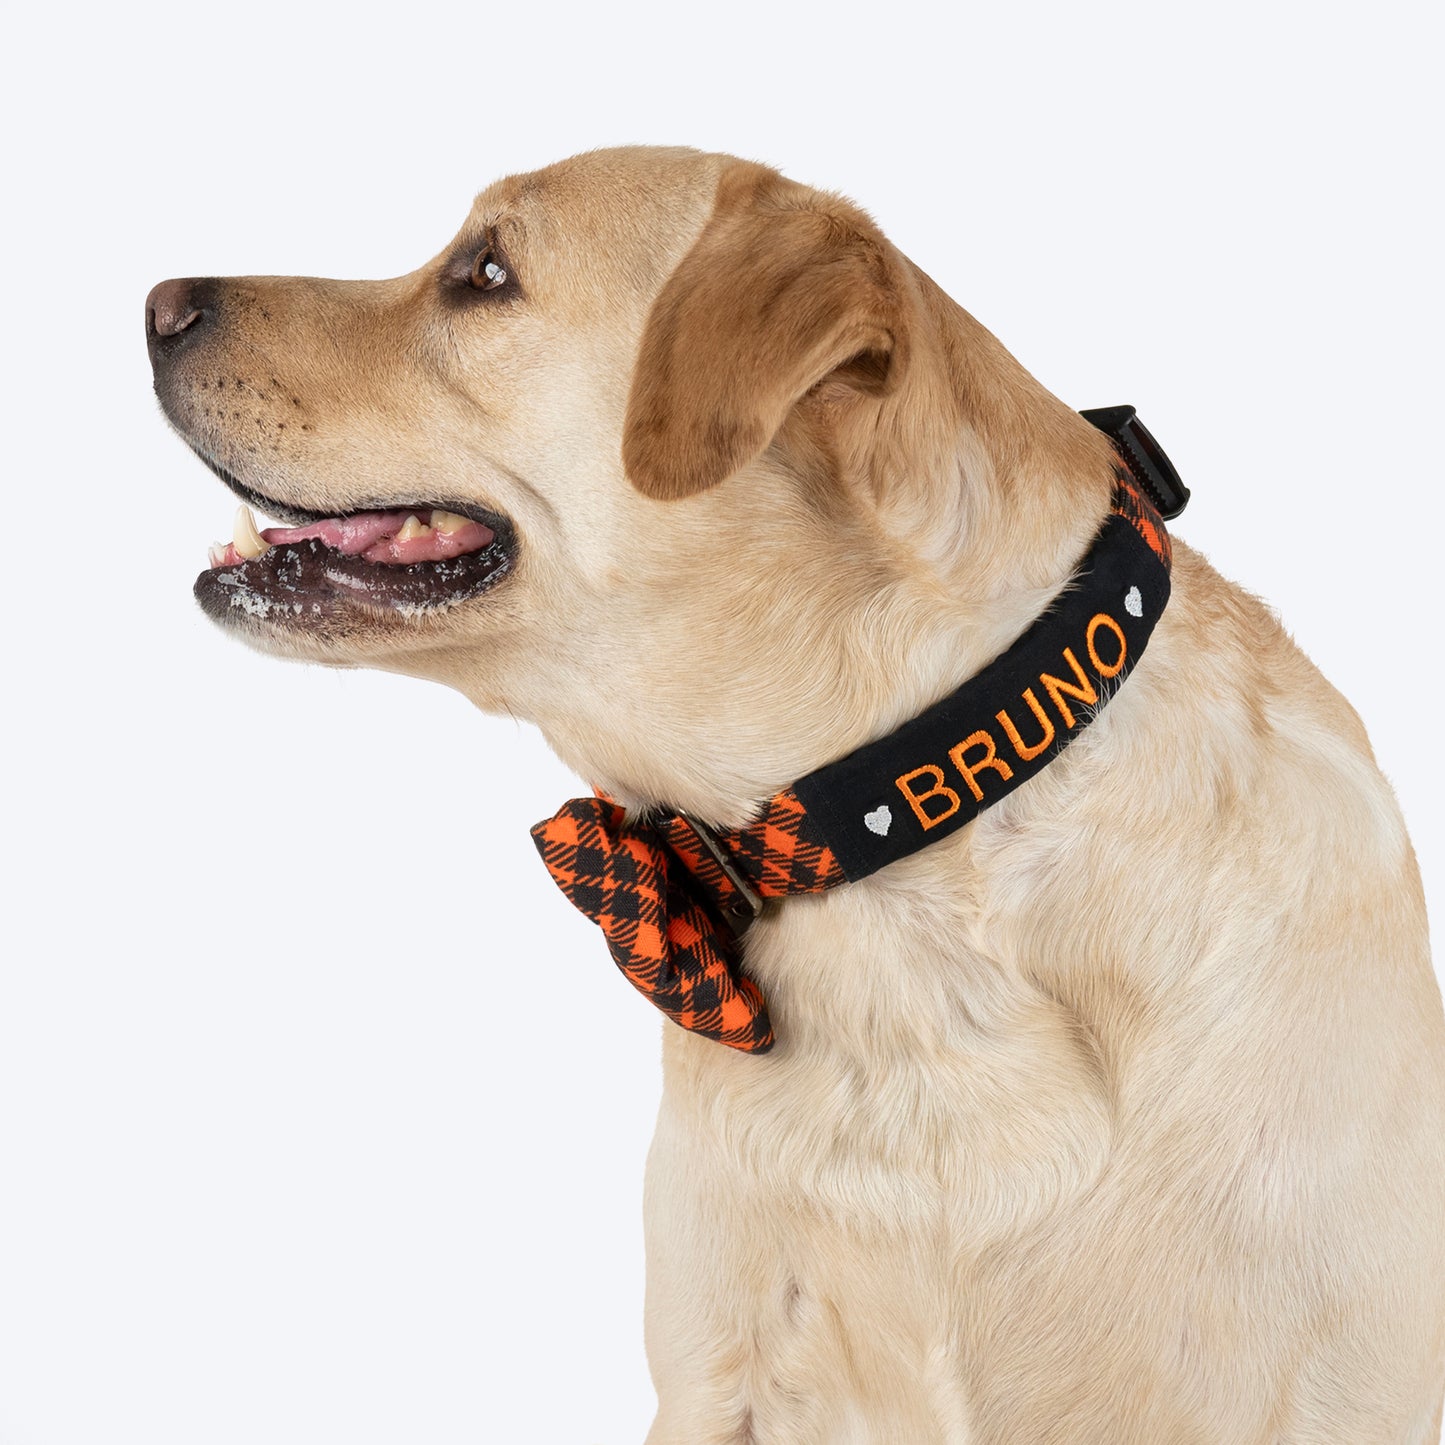 HUFT Personalised Tartan Fabric Collar With Bow Tie For Dogs - Orange - Heads Up For Tails